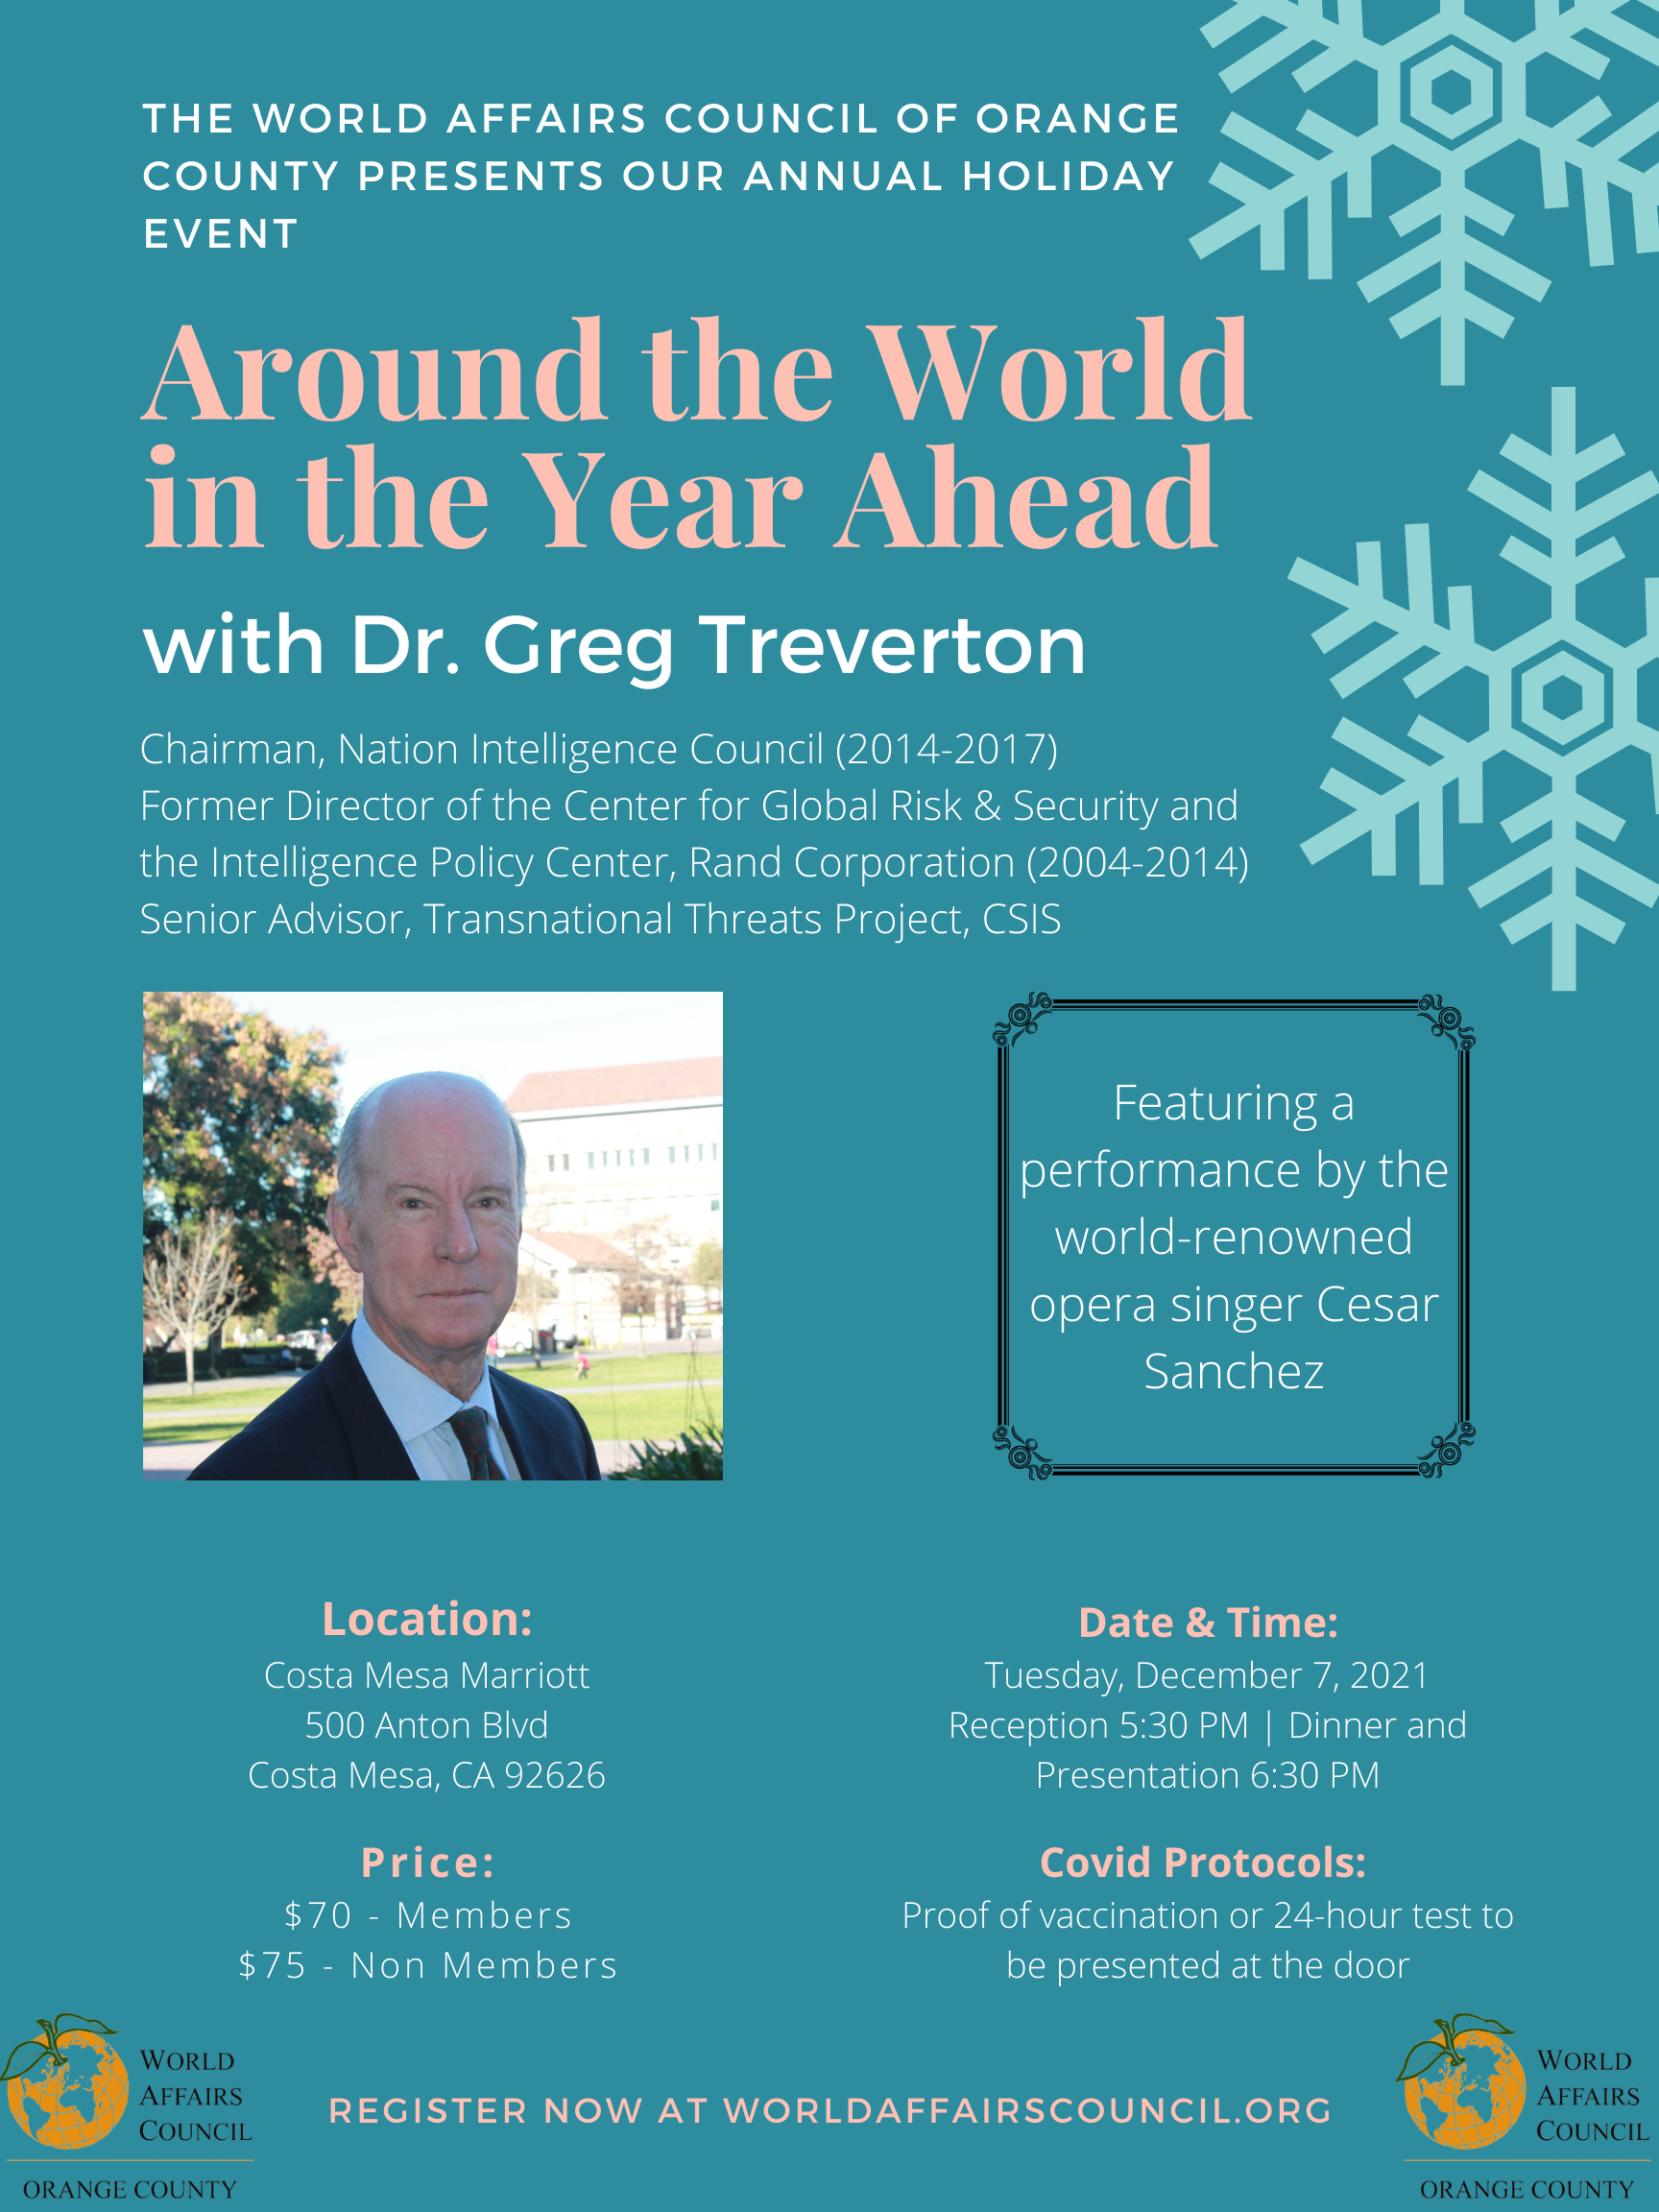 Annual Holiday Event: Around the World in the Year Ahead with Dr. Greg Treverton